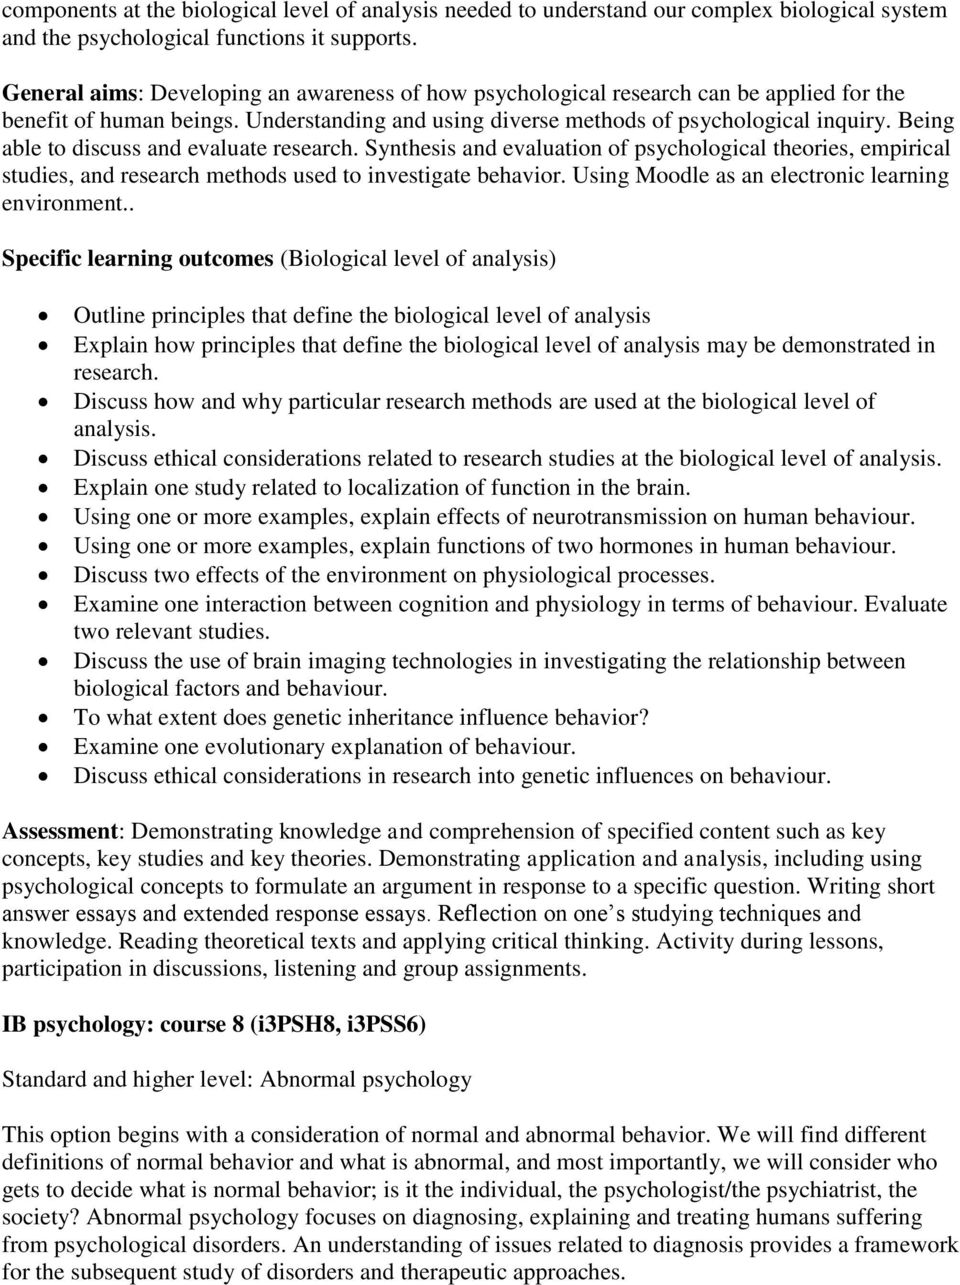 . Specific learning outcomes (Biological level of analysis) Outline principles that define the biological level of analysis Explain how principles that define the biological level of analysis may be